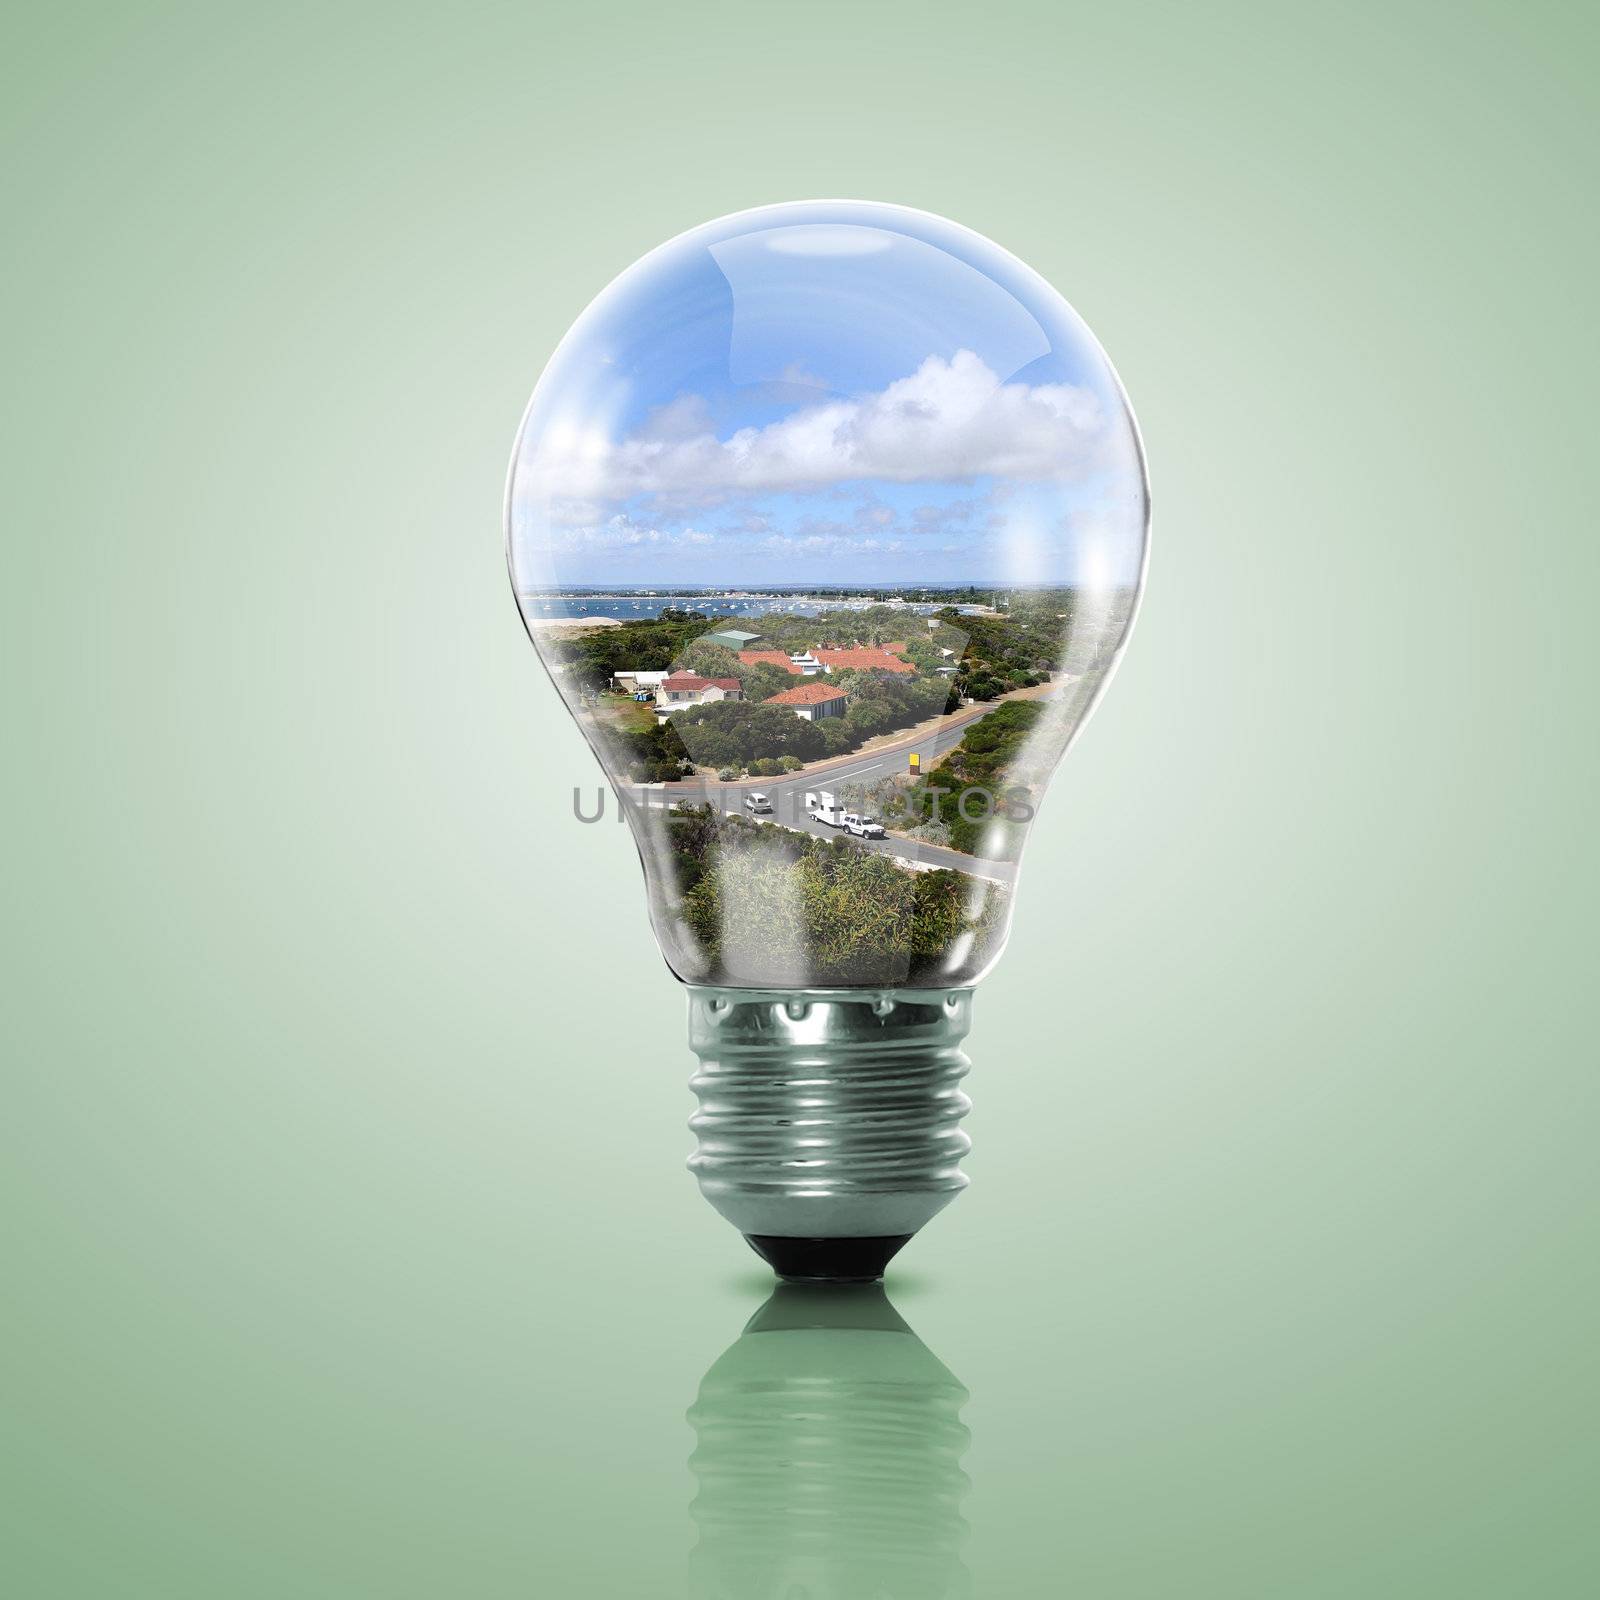 Electric light bulb and a plant inside it as symbol of green energy